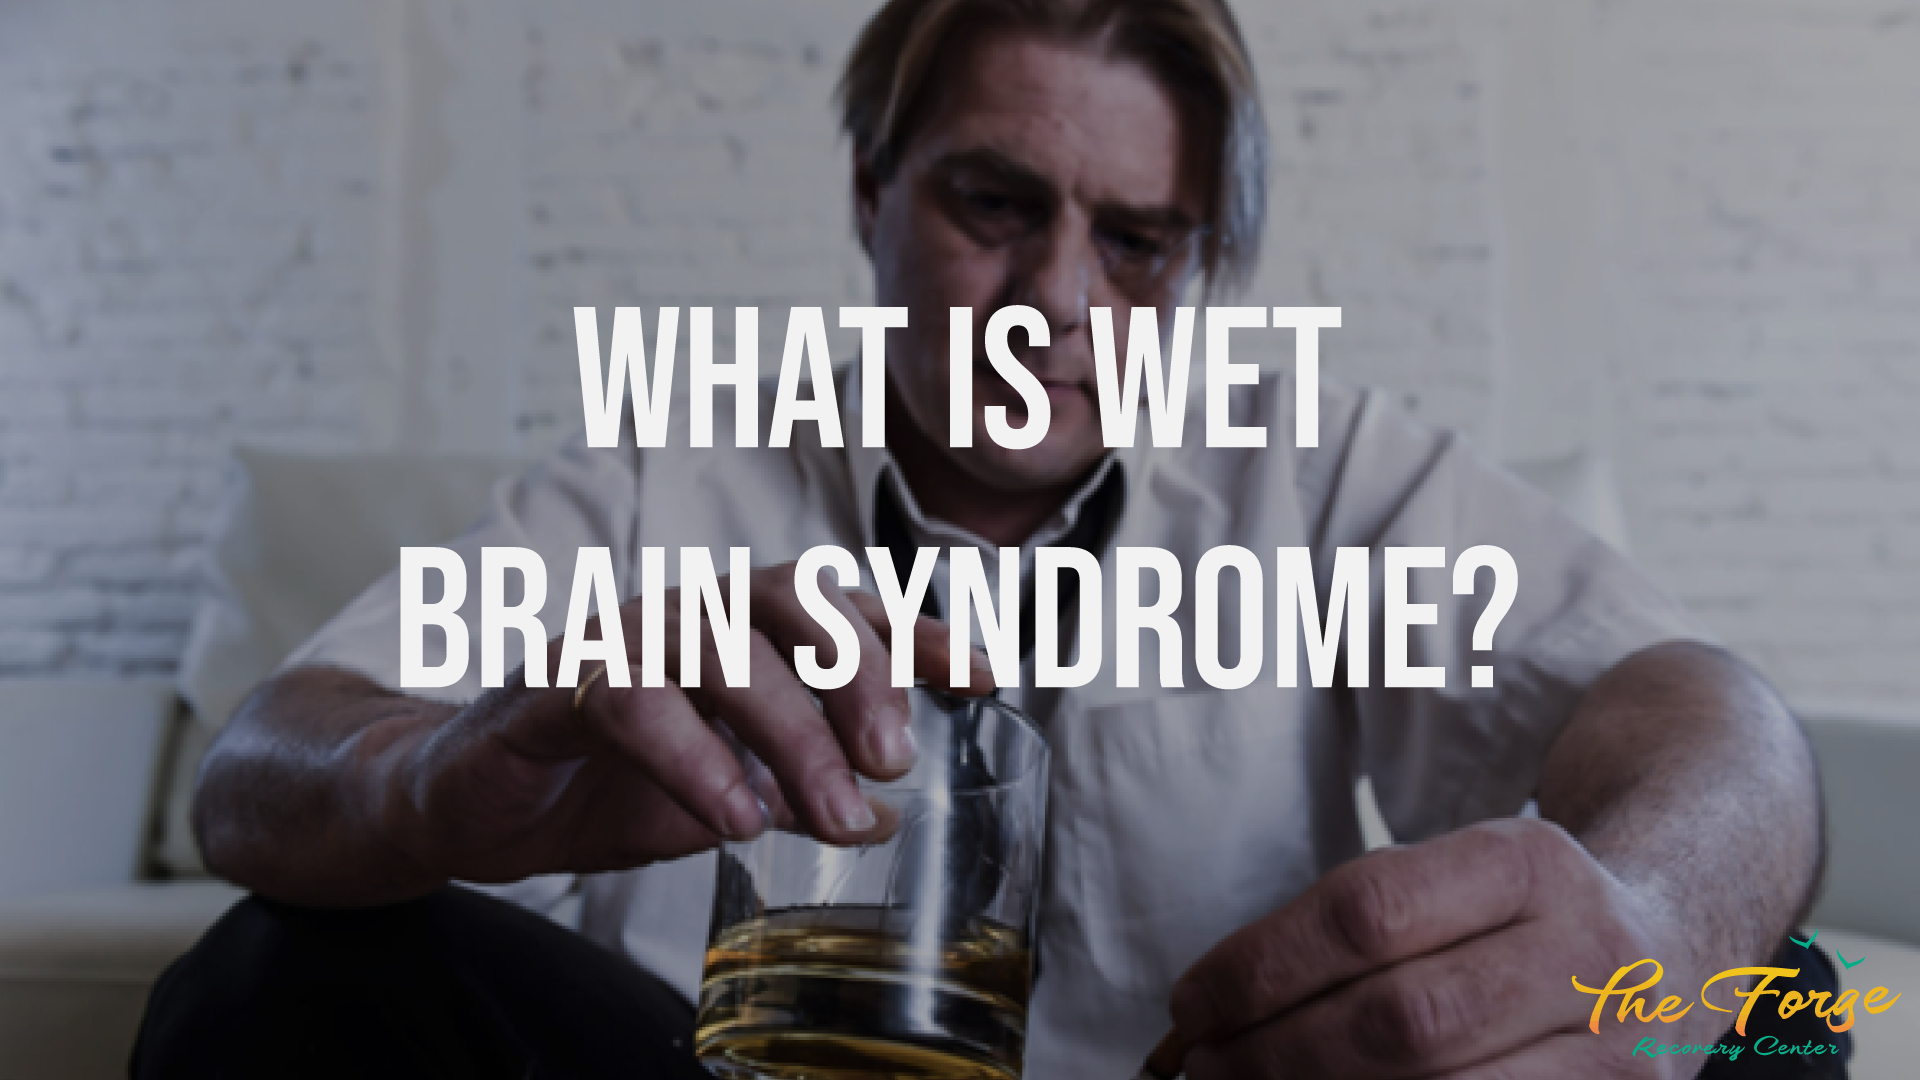 Wet Brain Syndrome: Signs, Symptoms, and Treatment Guide